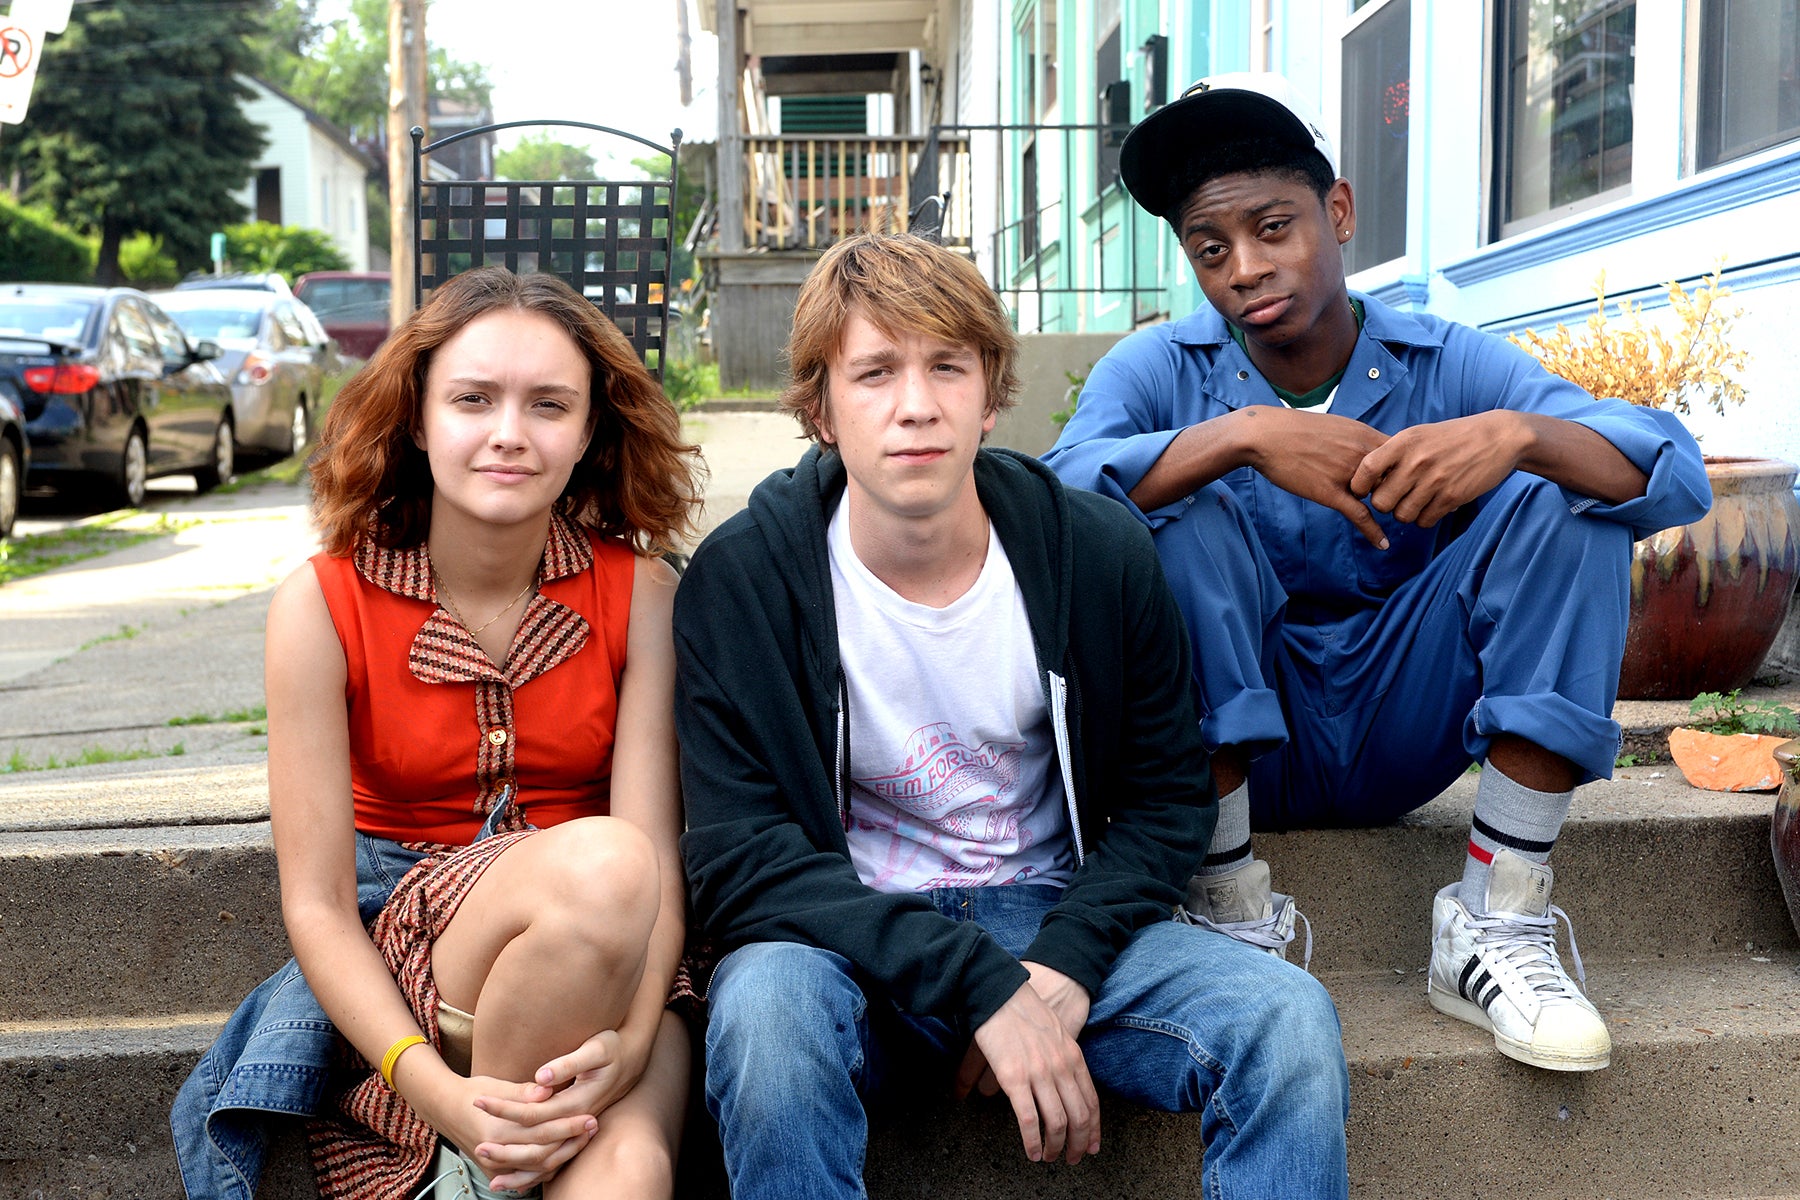 Rachel (Olivia Cooke), Greg (Thomas Mann), and Earl (RJ Cyler) in Me and Earl and the Dying Girl